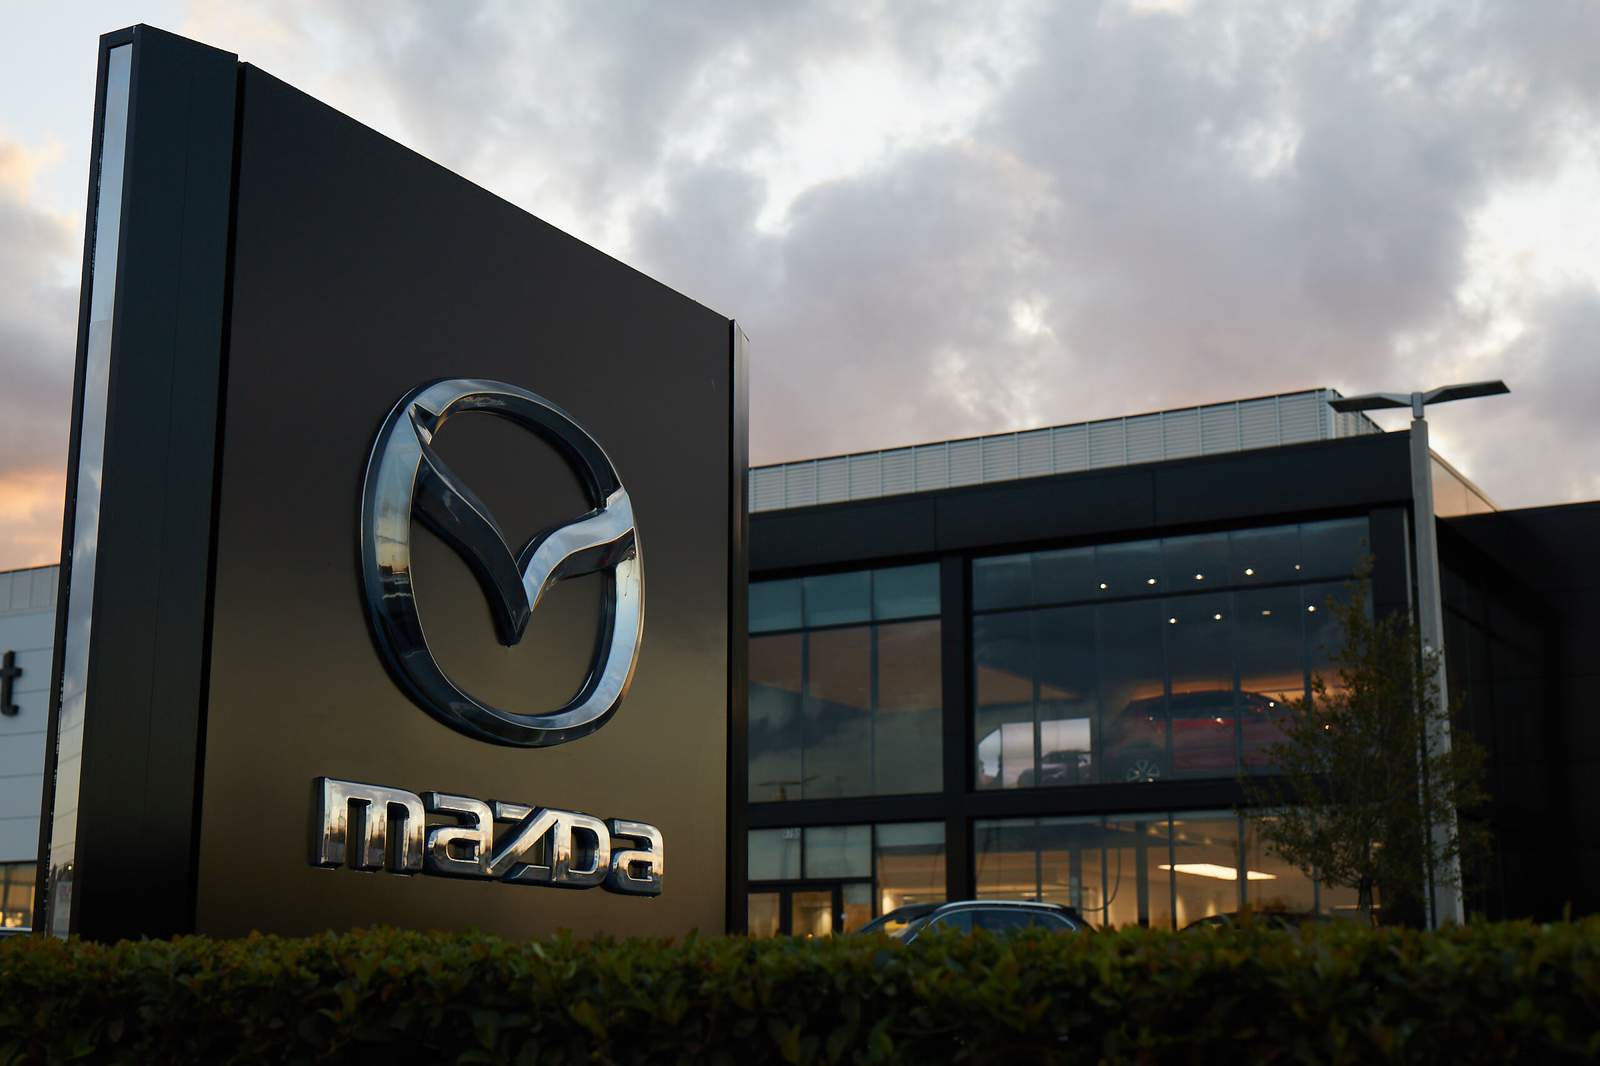 Free oil change, you say? Mazda shows appreciation to healthcare and frontline workers